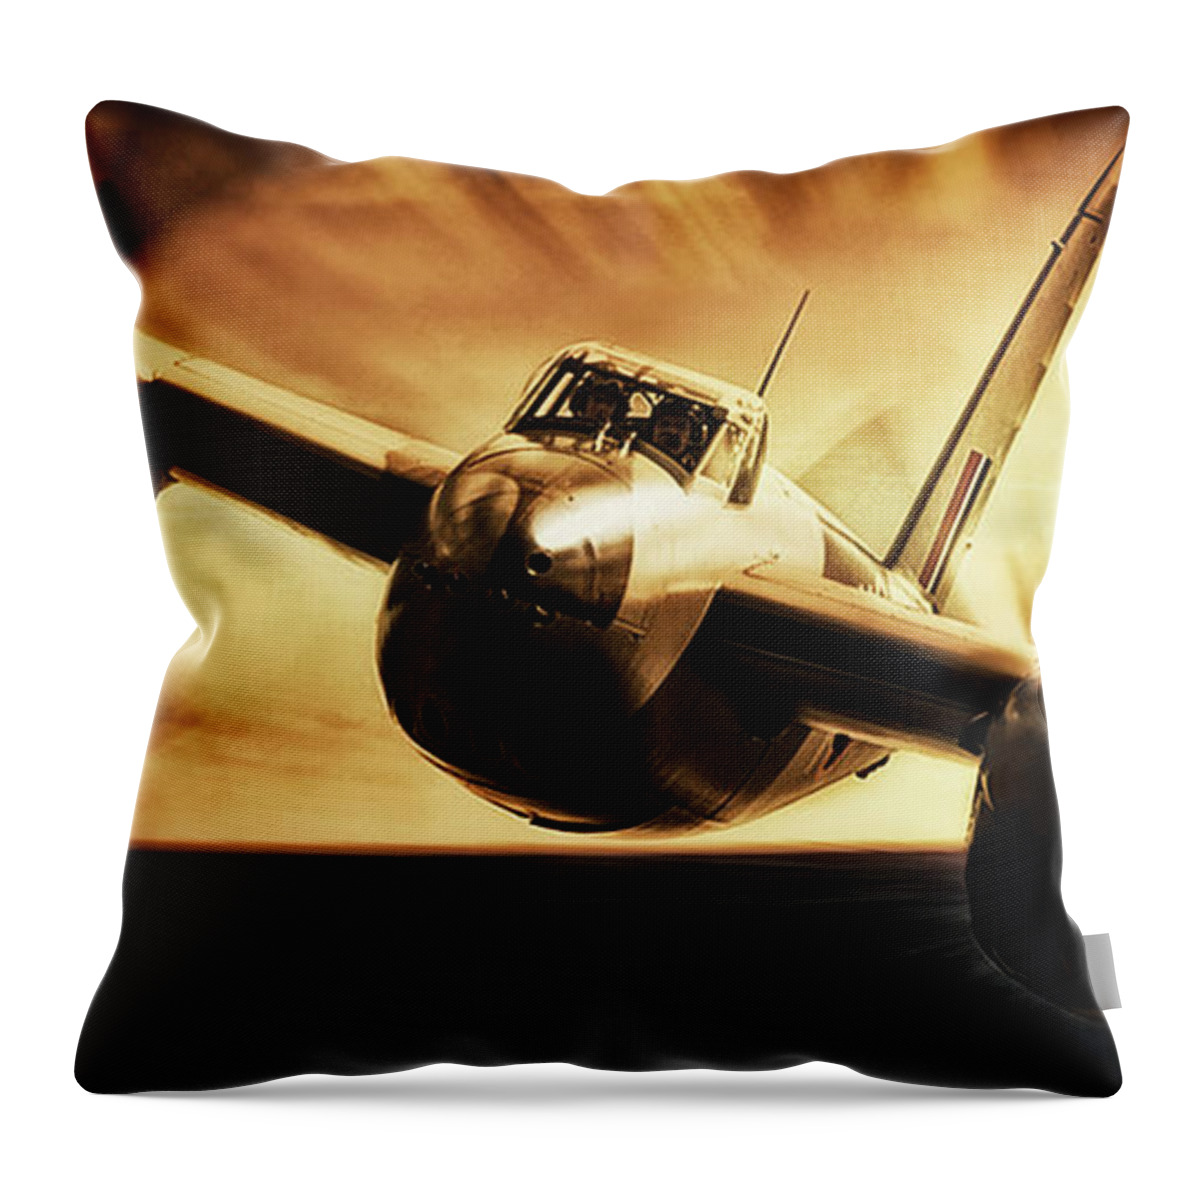 Mosquito Throw Pillow featuring the digital art Mosquito by Airpower Art